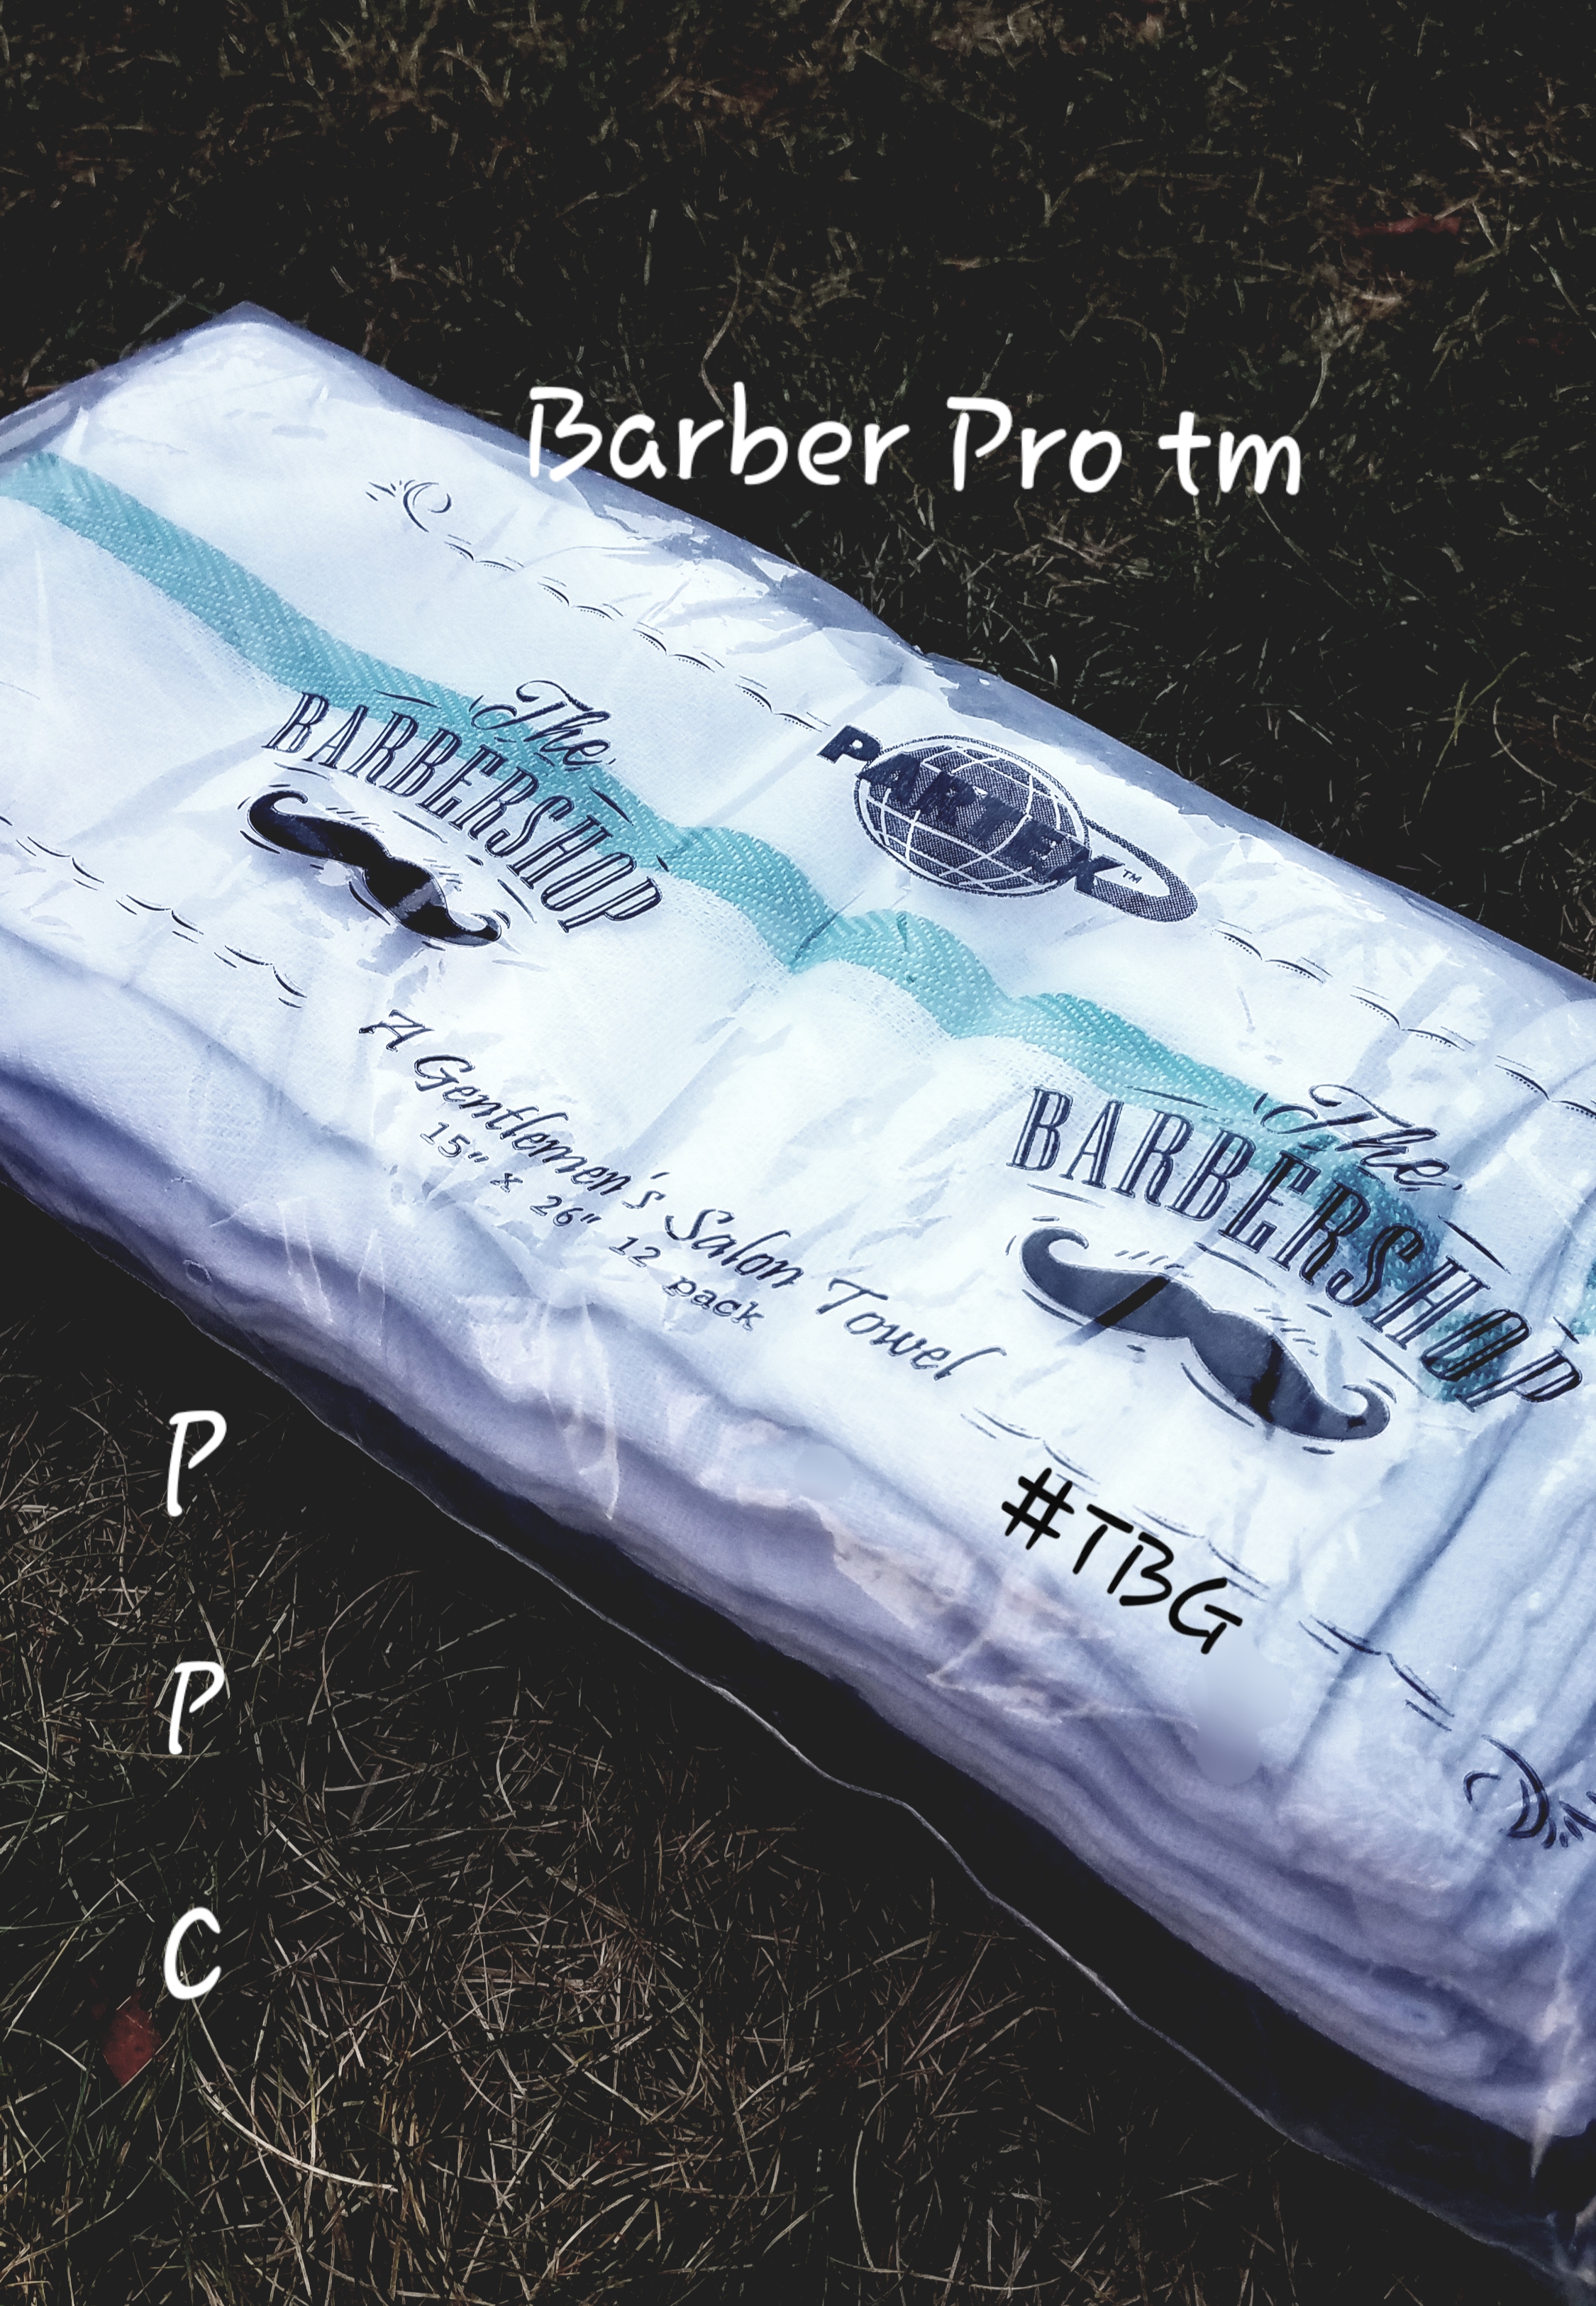 POLLY PRODUCTS / BARBER PRO TM GREEN STRIPED TOWELS #TBG